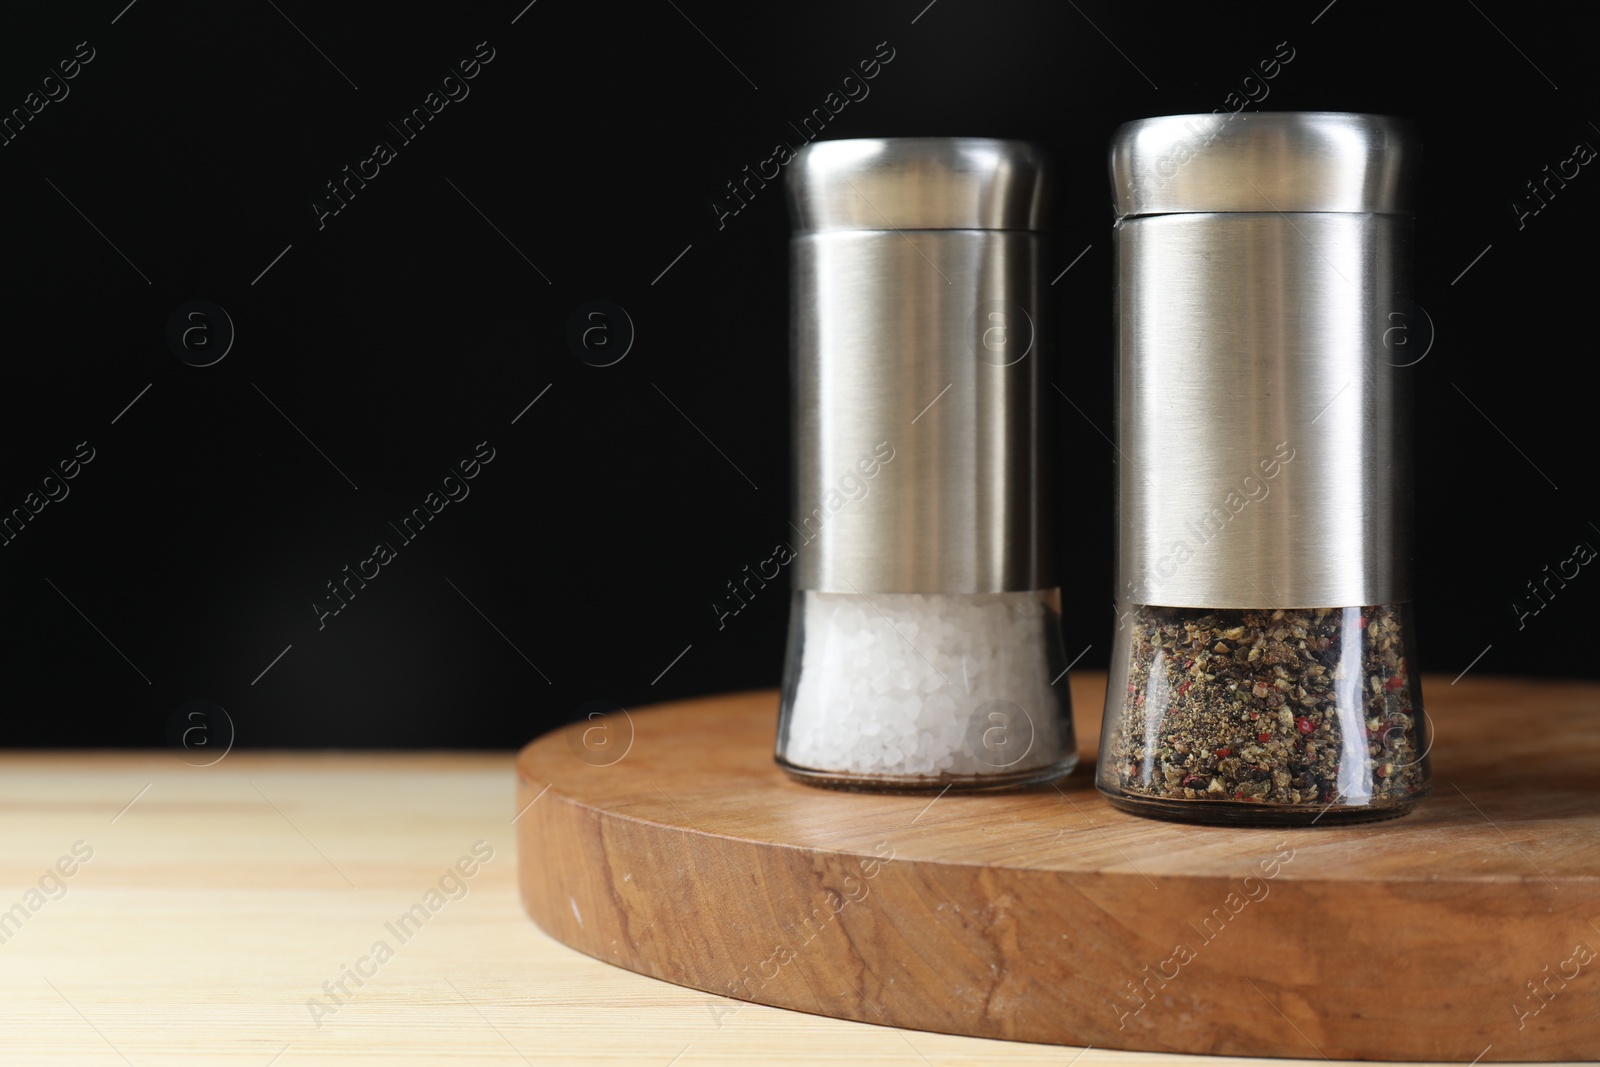 Photo of Salt and pepper shakers on wooden table against black background, space for text